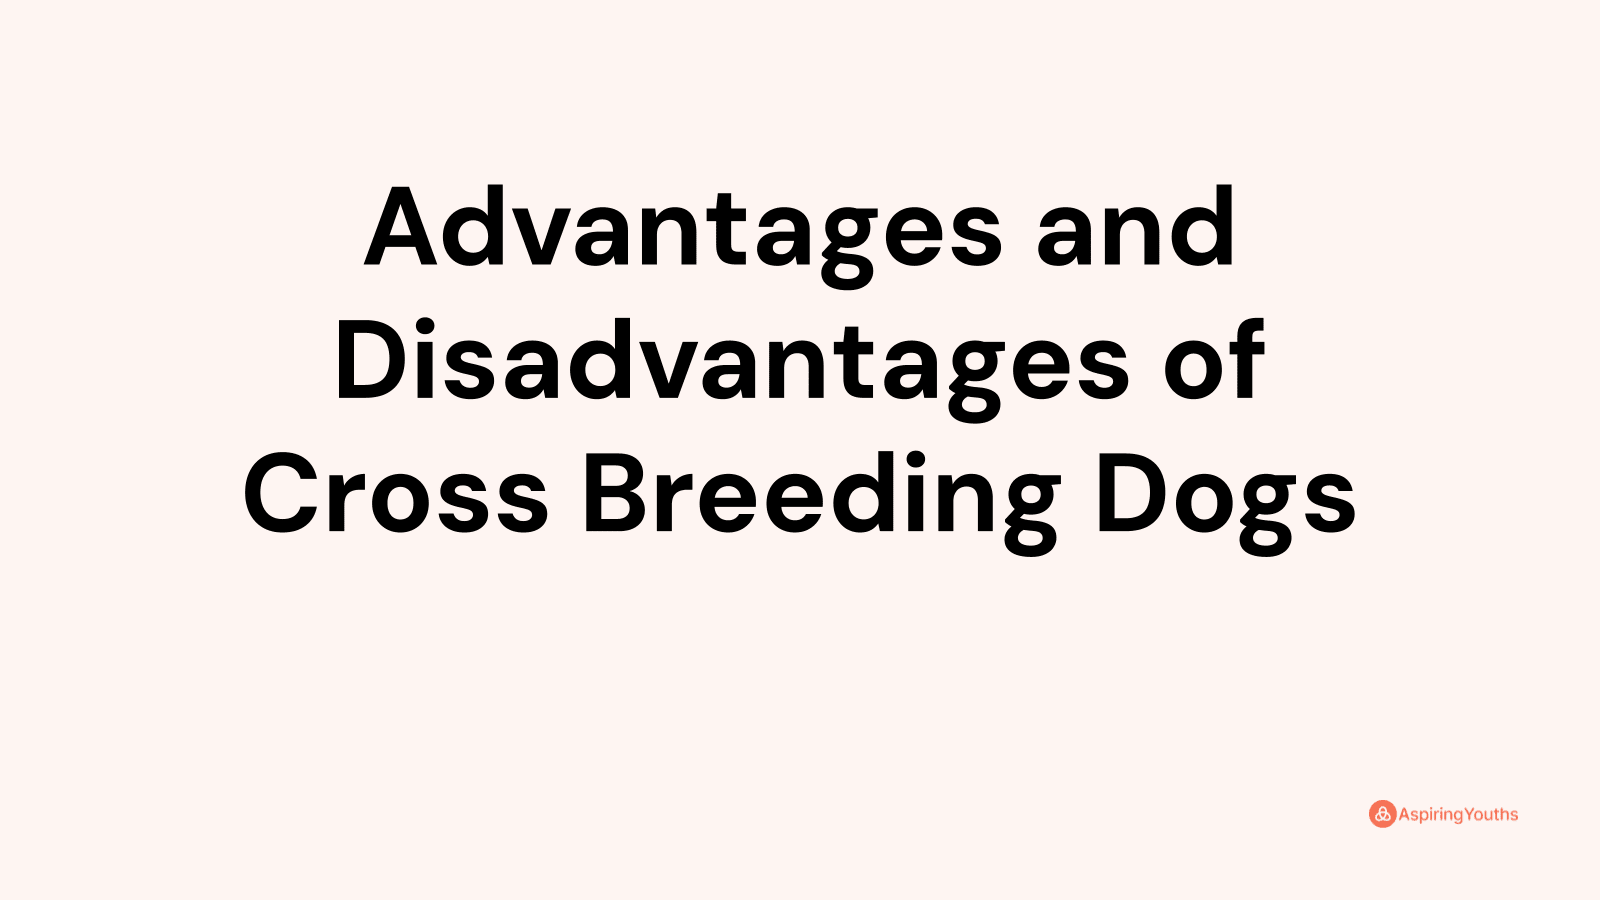 Advantages and disadvantages of Cross Breeding Dogs